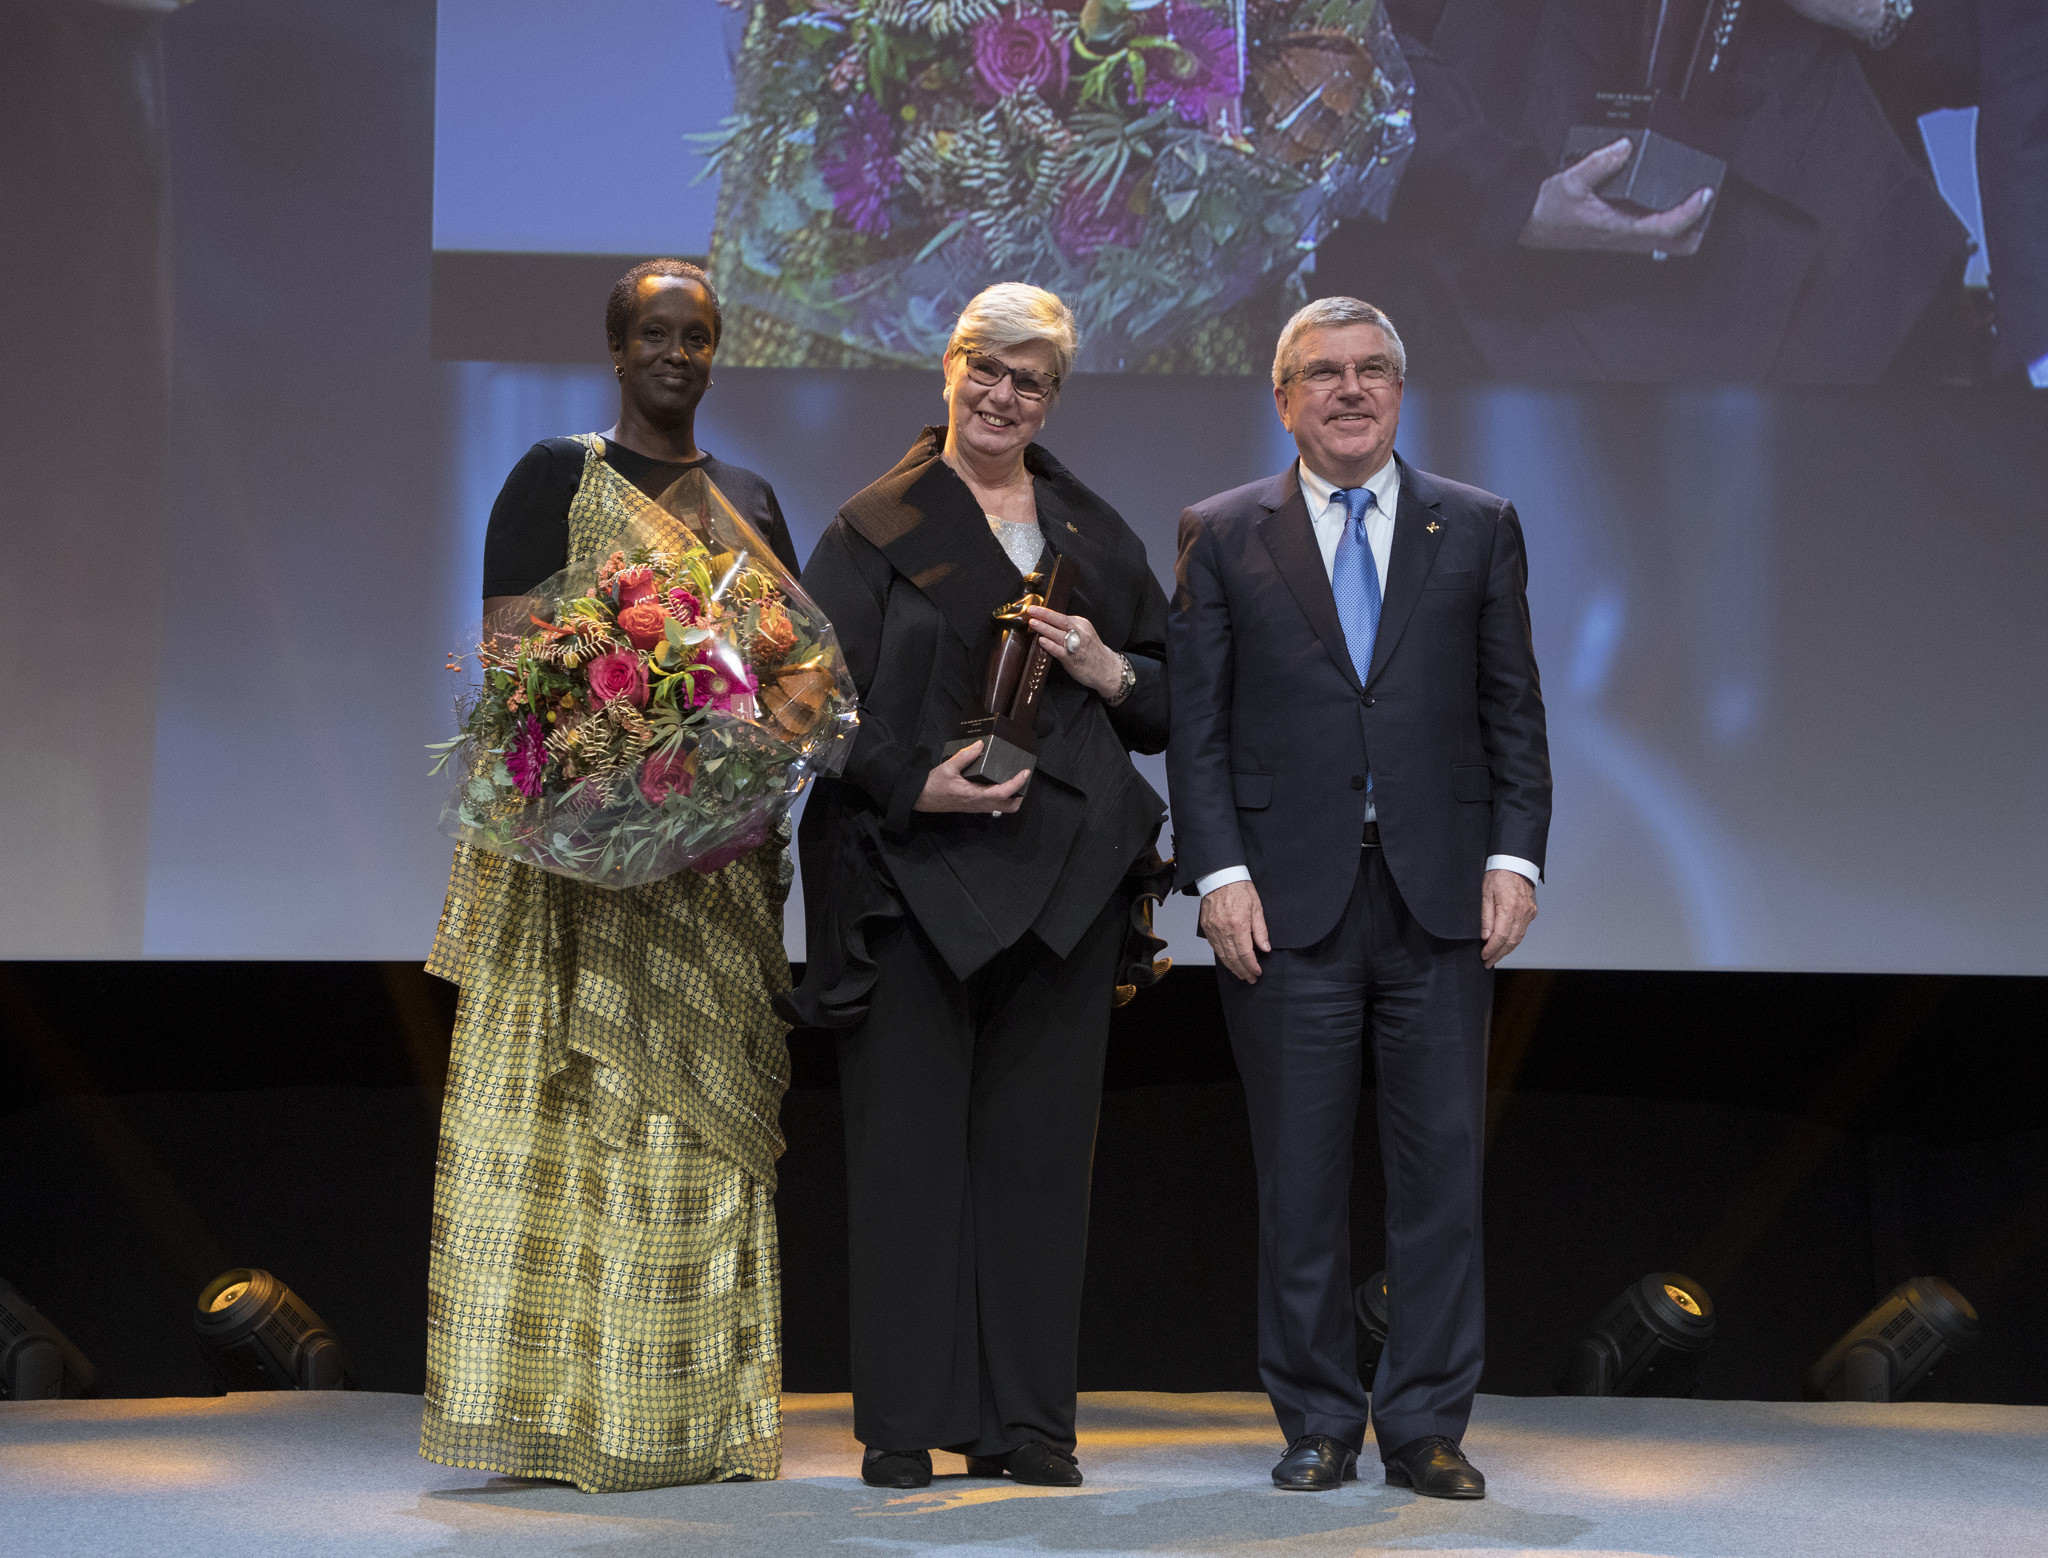 The programme is a legacy project of Birgitta Kervinen, pictured here receiving the IOC World Trophy from IOC President Thomas Bach and IOC Women in Sport Commission chair Lydia Nsekera ©IOC/Flickr